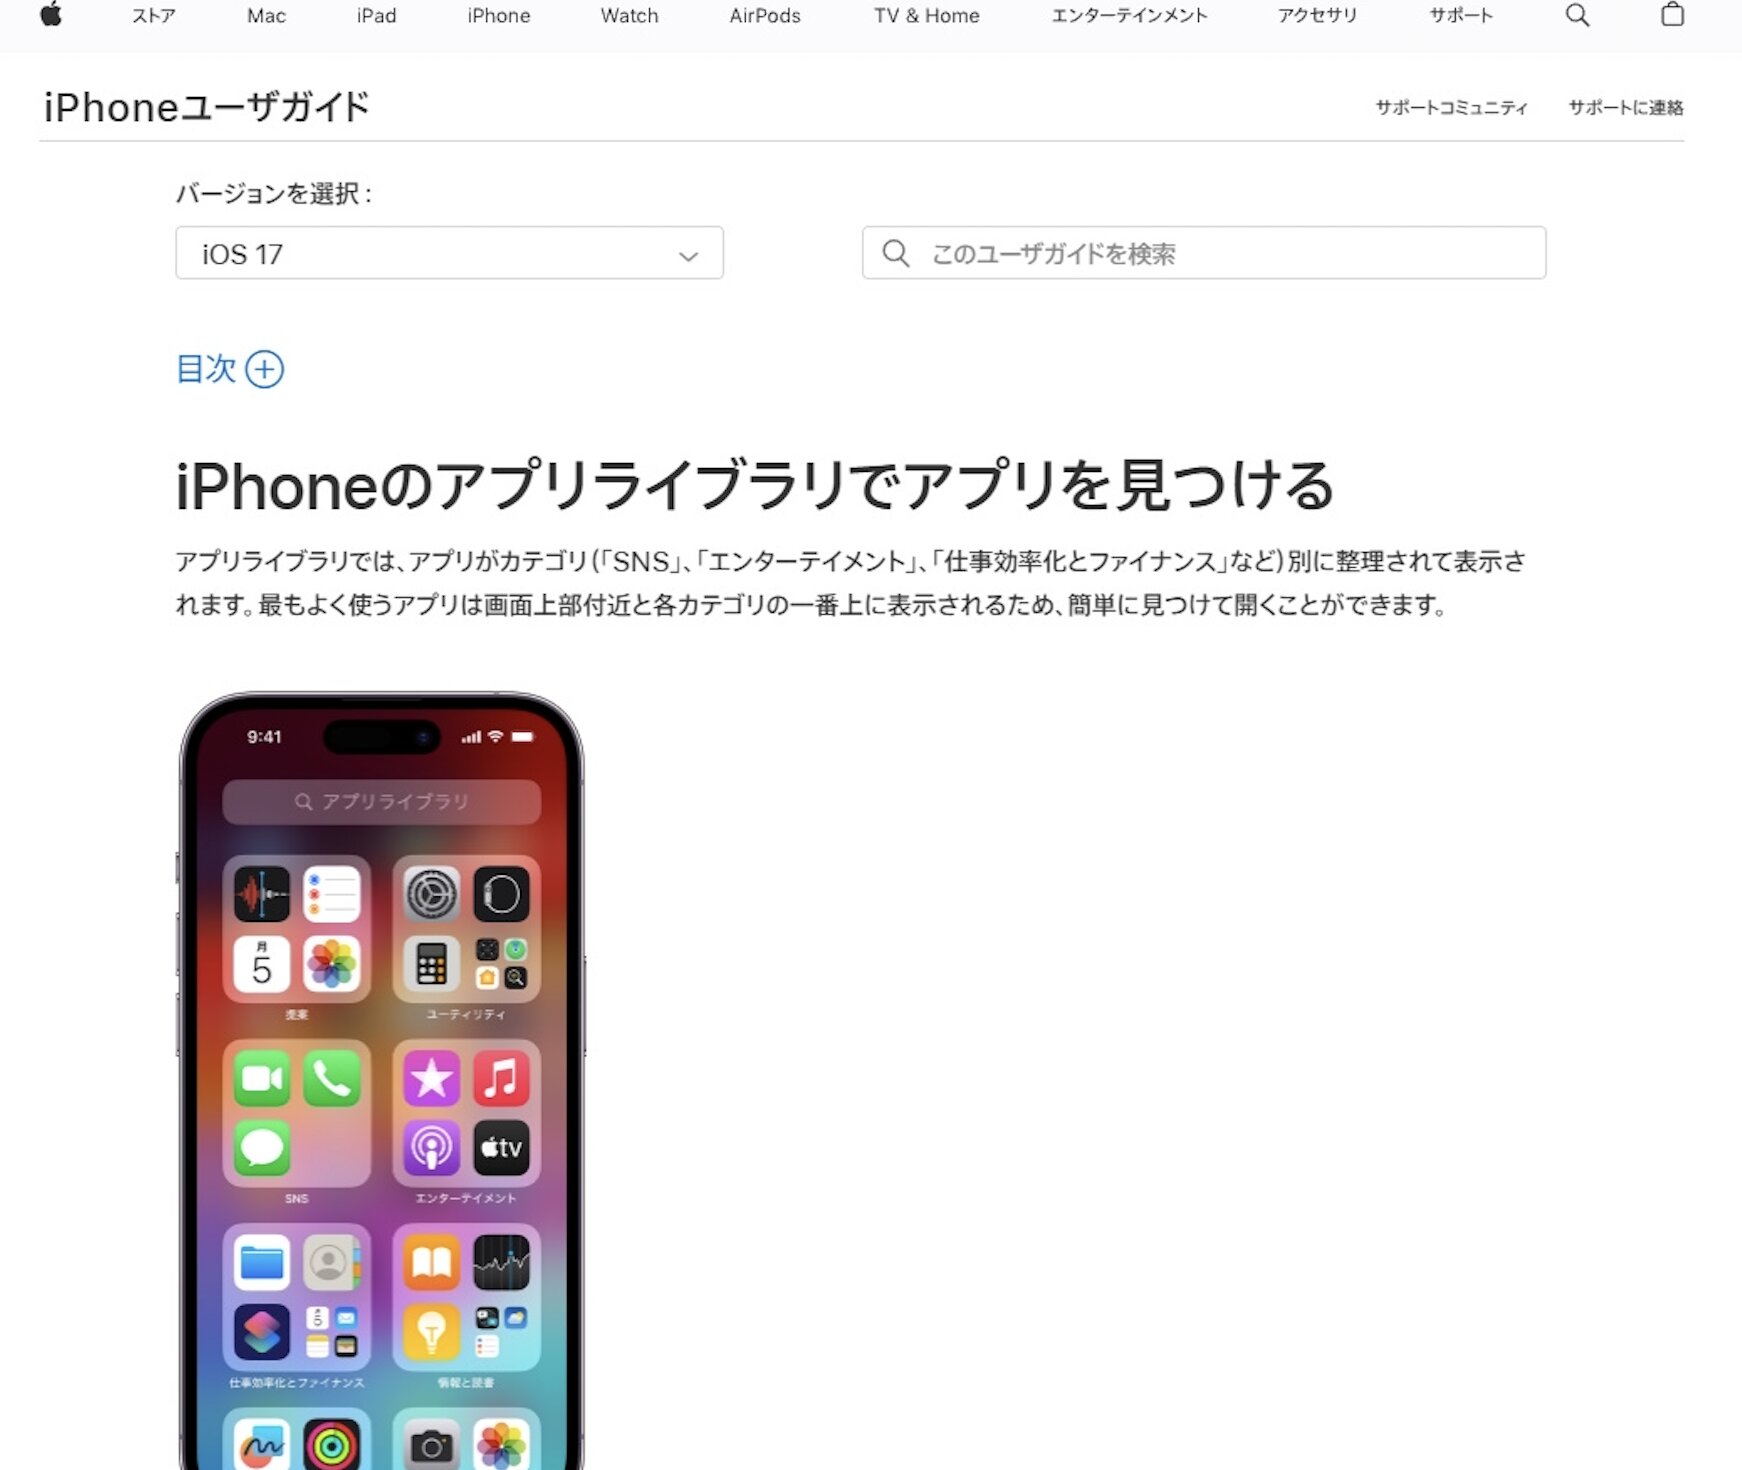 https://support.apple.com/ja-jp/guide/iphone/iph87abad19a/ios